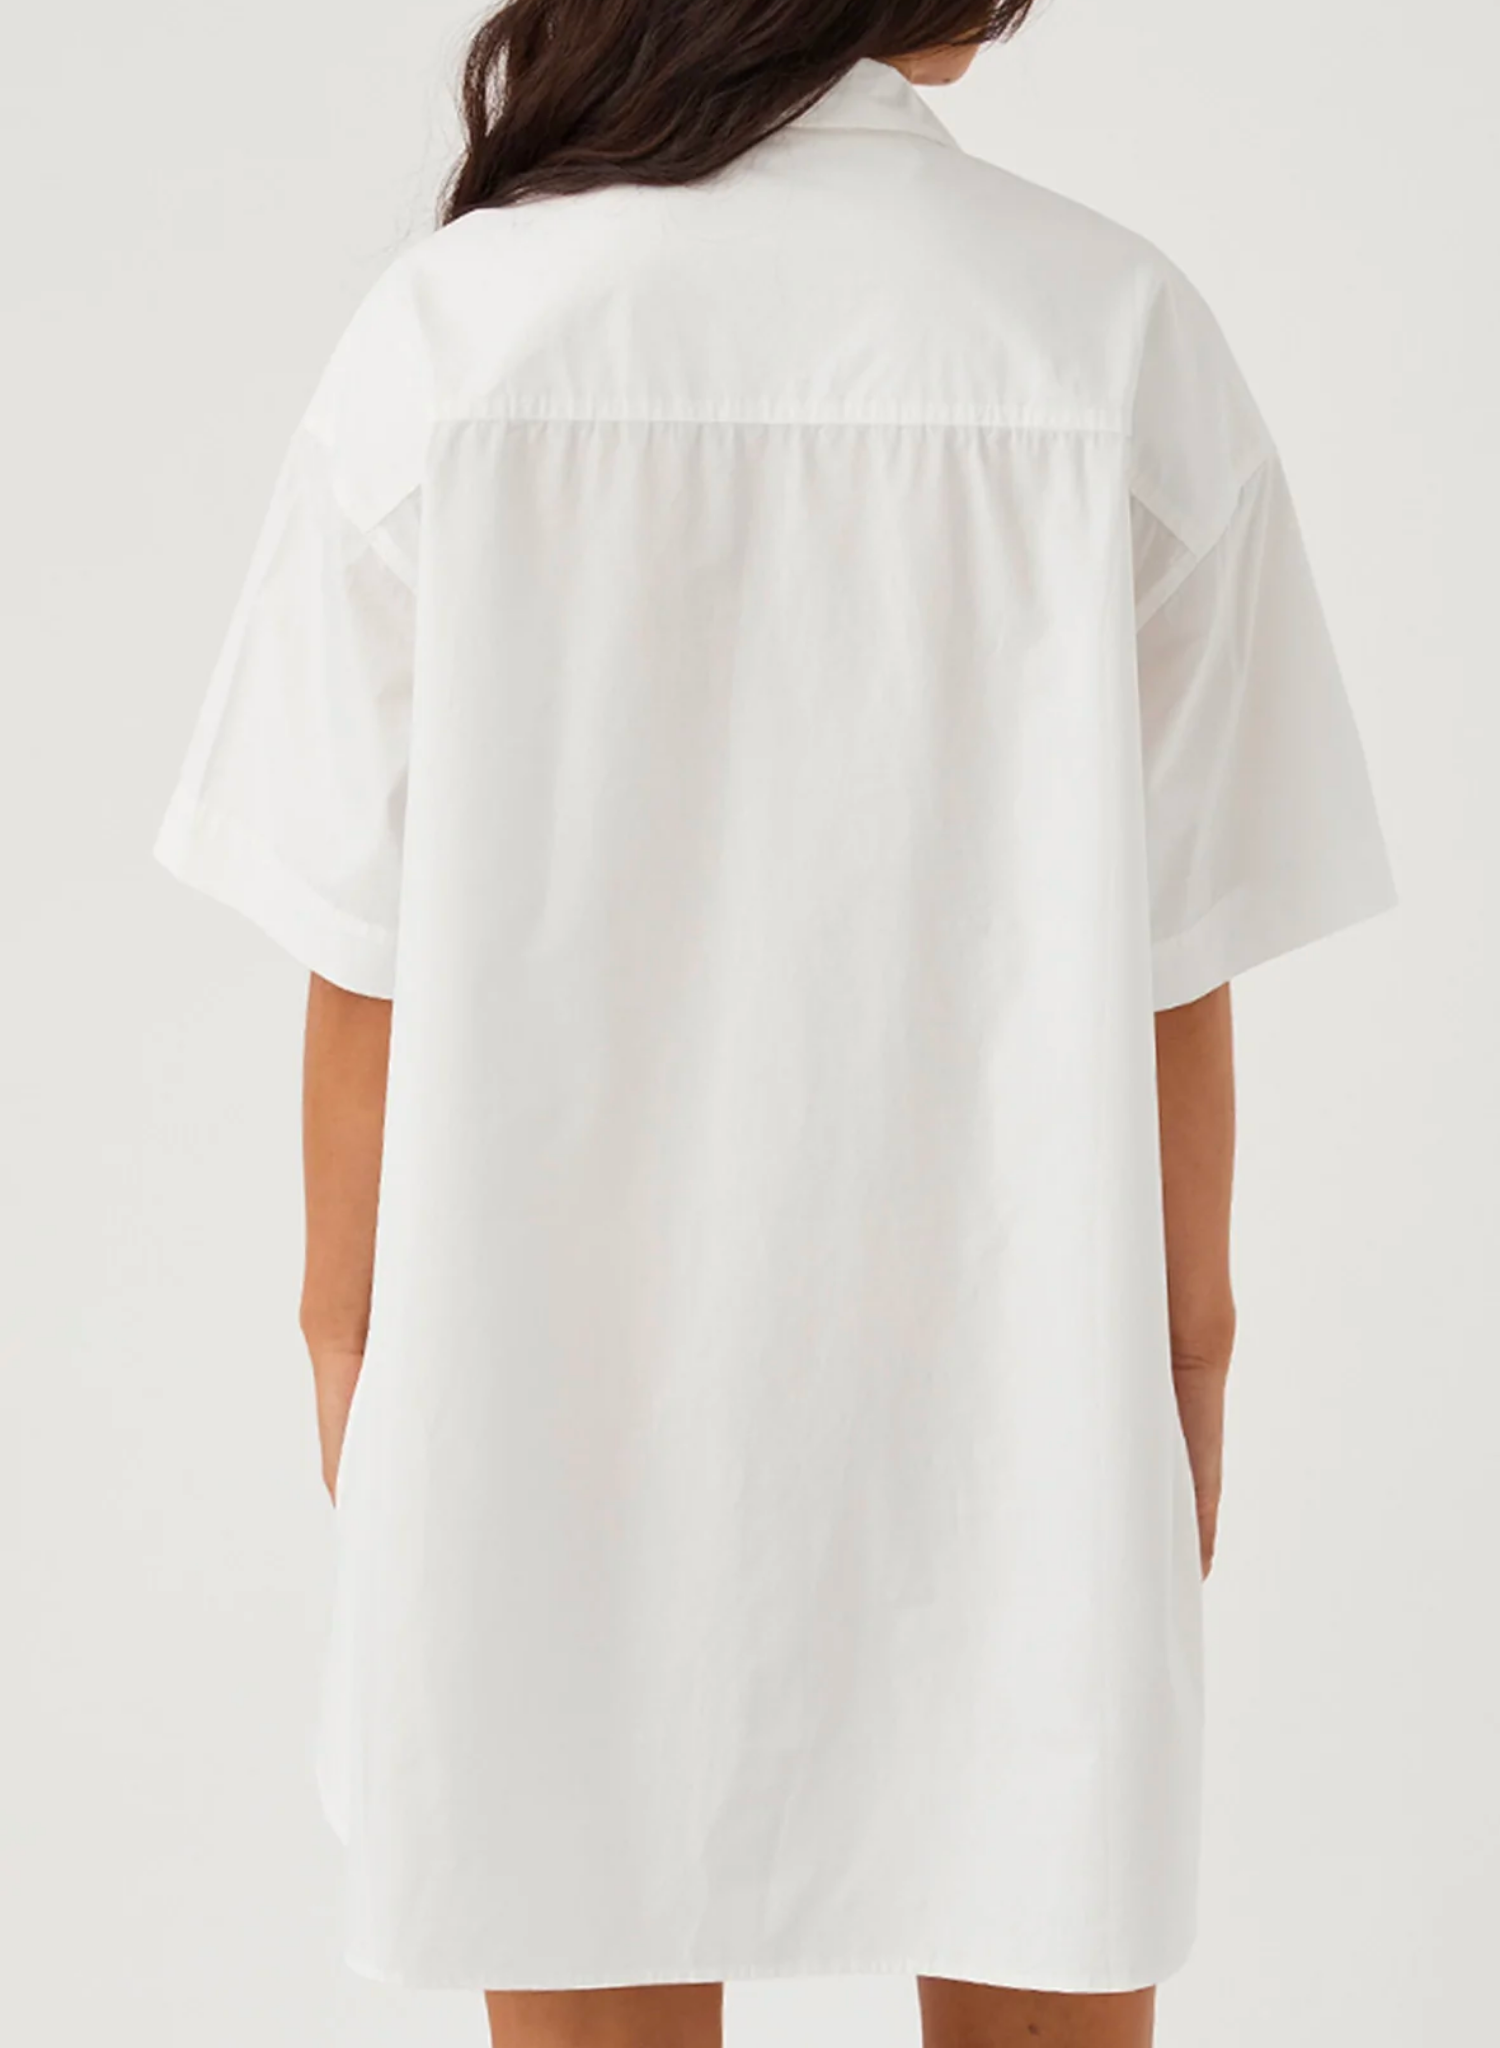 Button Down Front Front Pockets Short Sleeve Oversized Shirt Dress Mid Thigh Length Premium Poplin Fabric Ethically produced Free of harmful chemicals: OEKO-TEX Standard 100 100%  GOTS Certified Organic Cotton